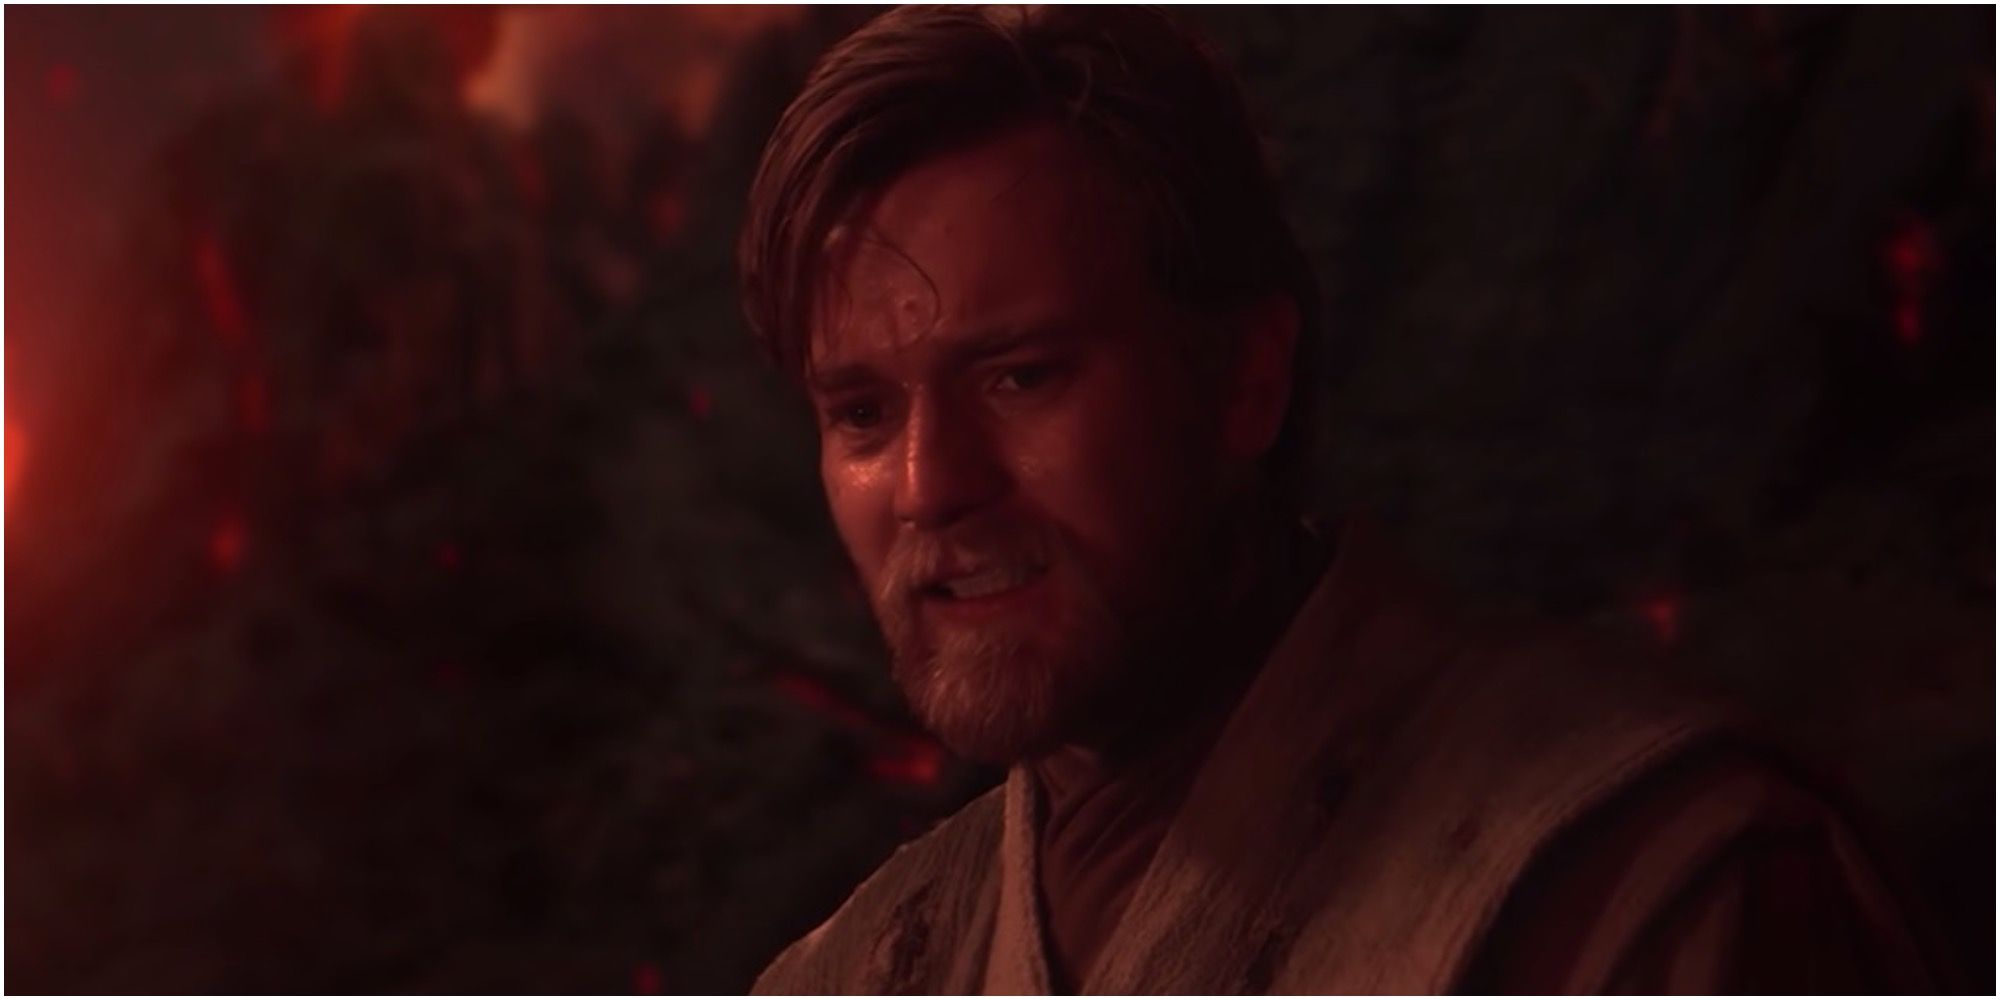 Obi-Wan pleads to a suffering Anakin that he was the chosen one and his brother